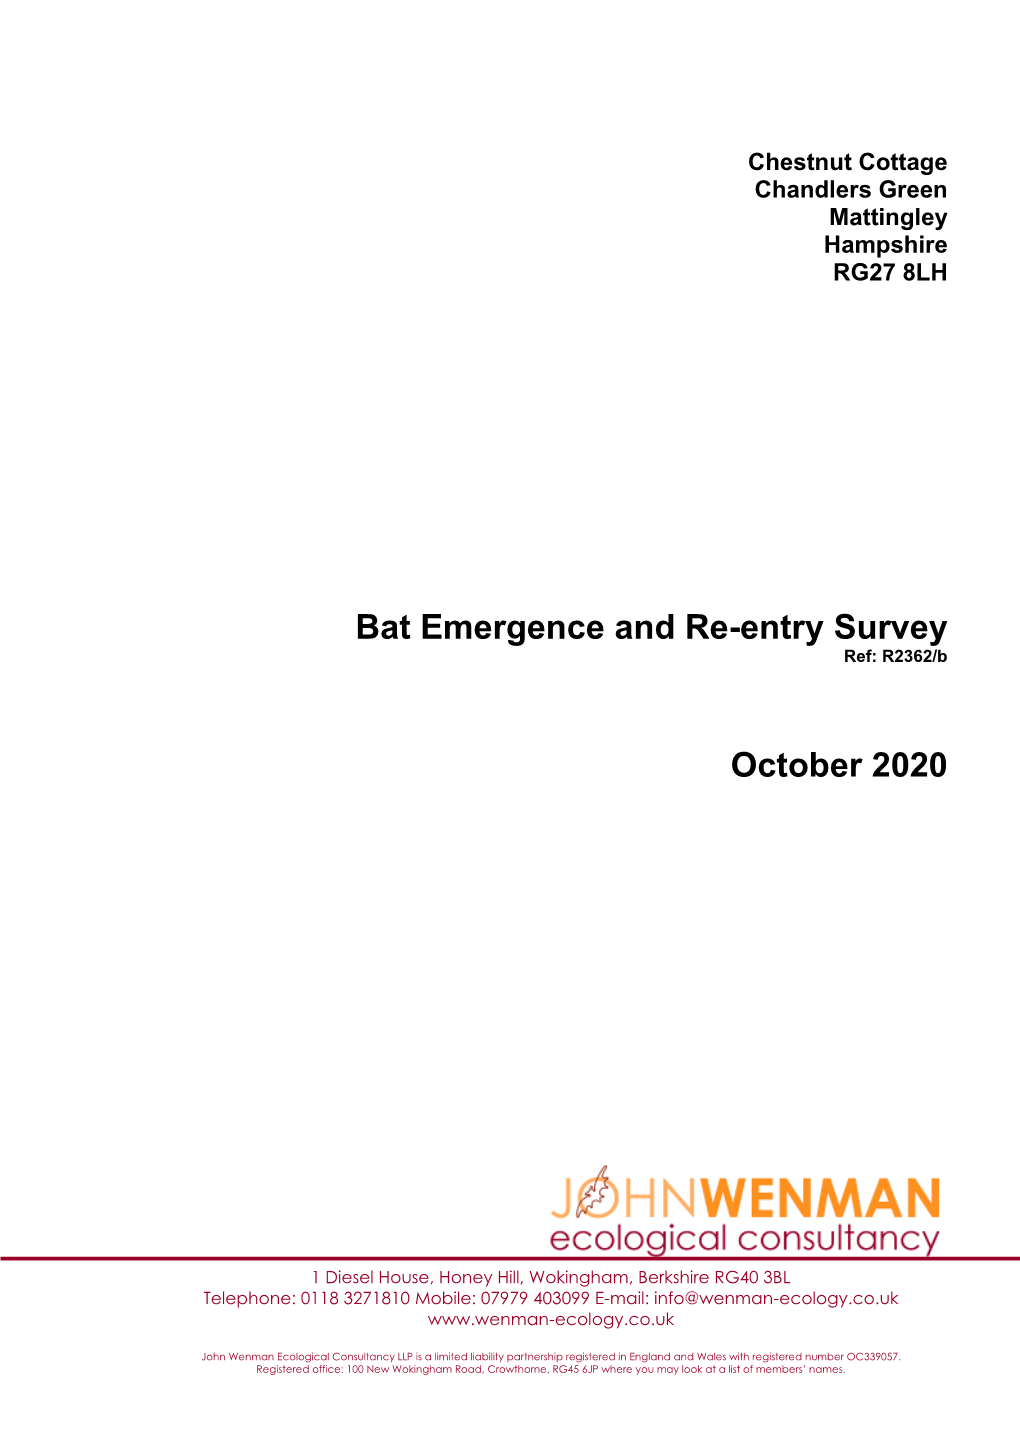 Bat Emergence and Re-Entry Survey October 2020